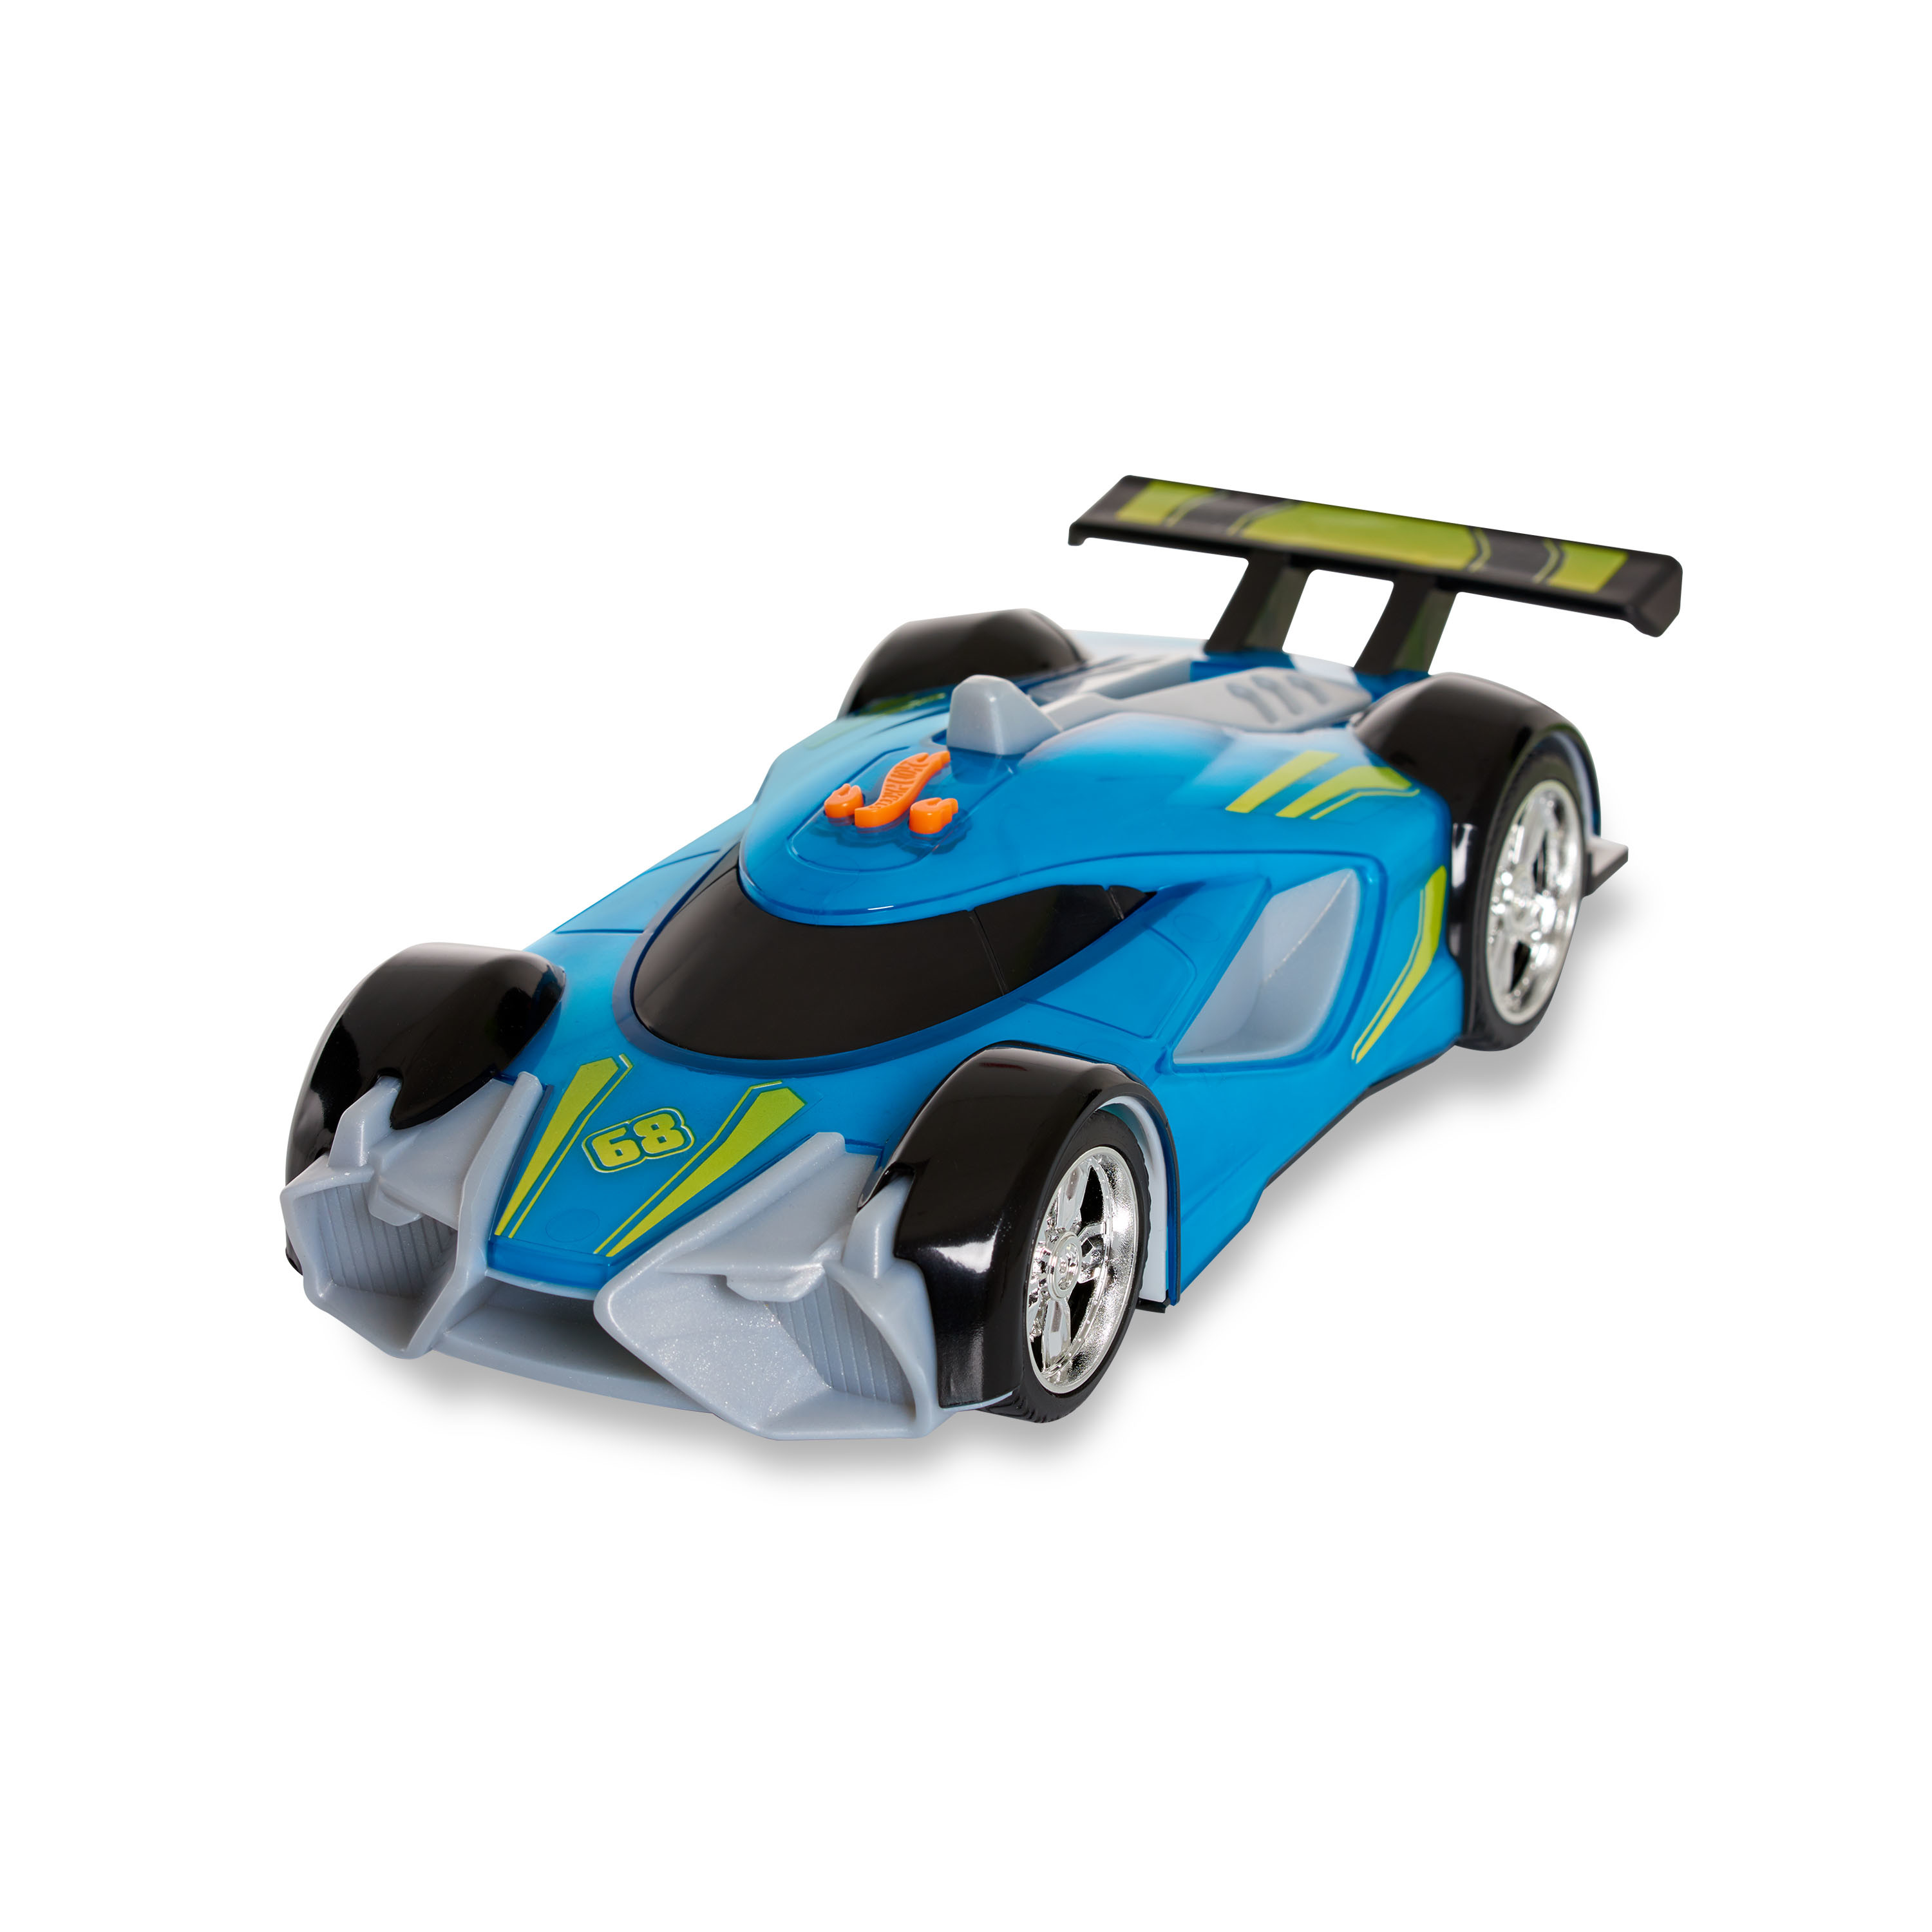 Hot Wheels Color Crashers Mach Speeder,  Kids Toys for Ages 3 Up, Gifts and Presents - image 1 of 3